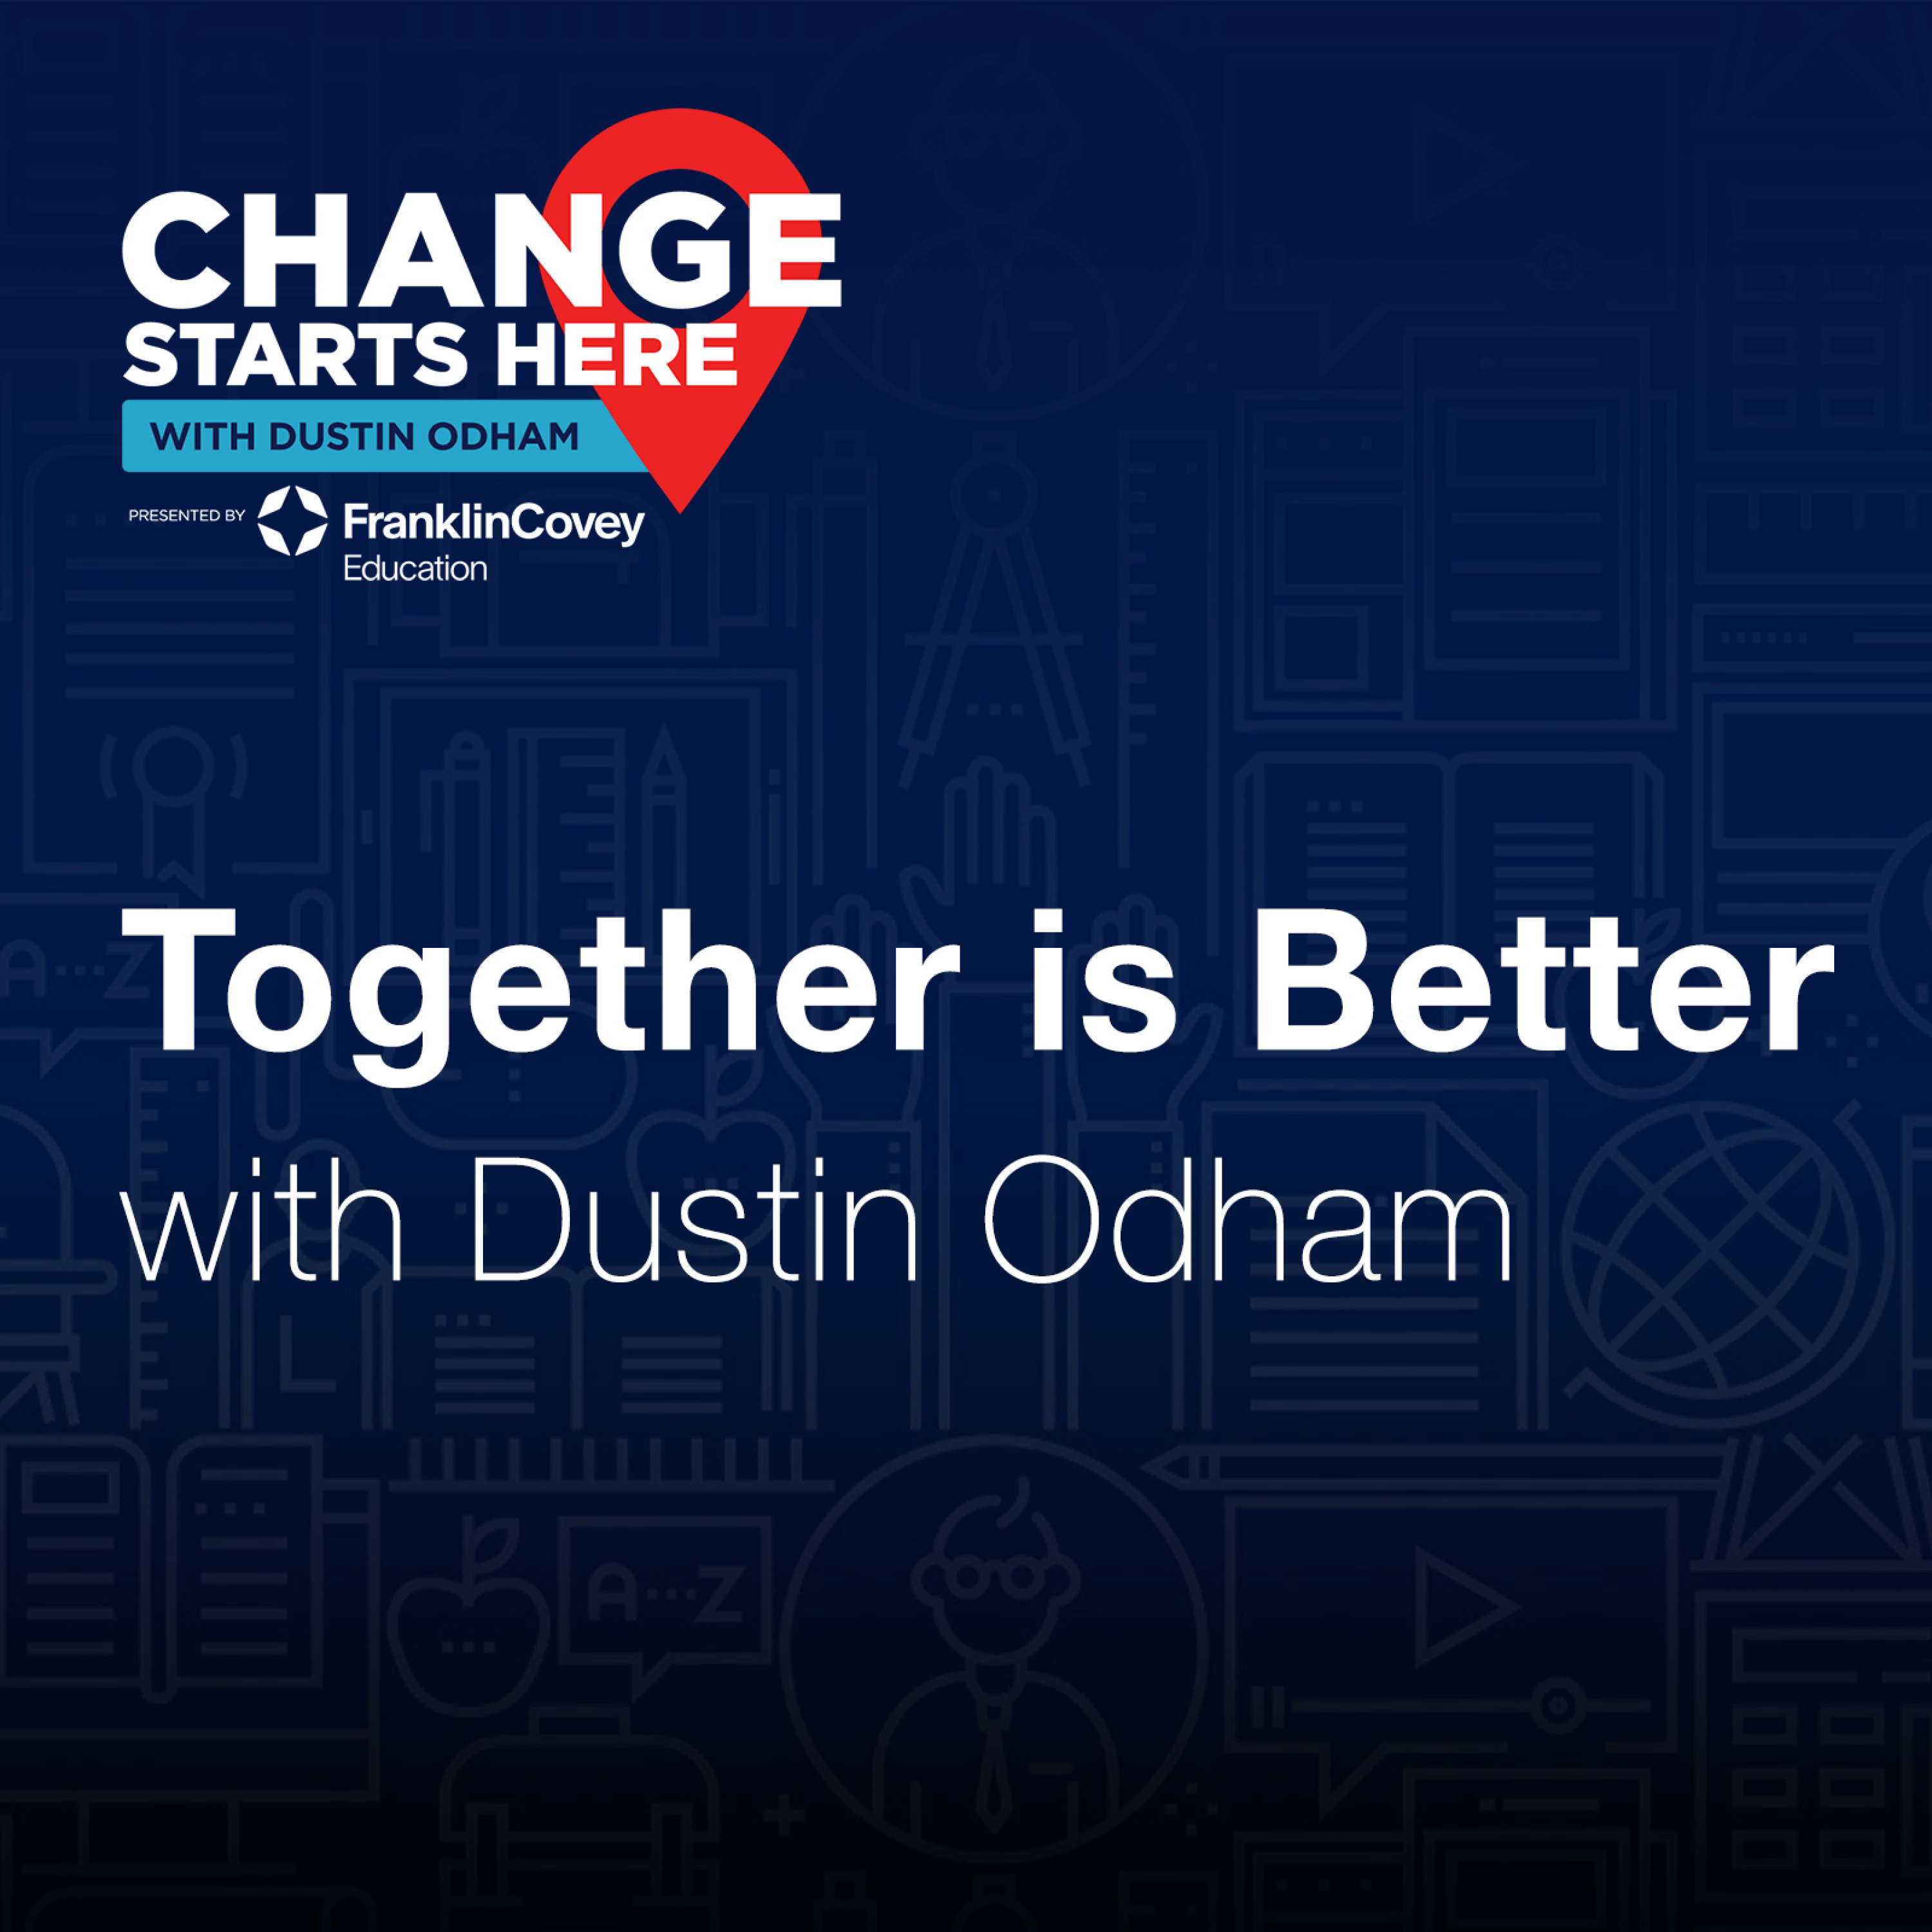 Dustin Odham - Together is Better